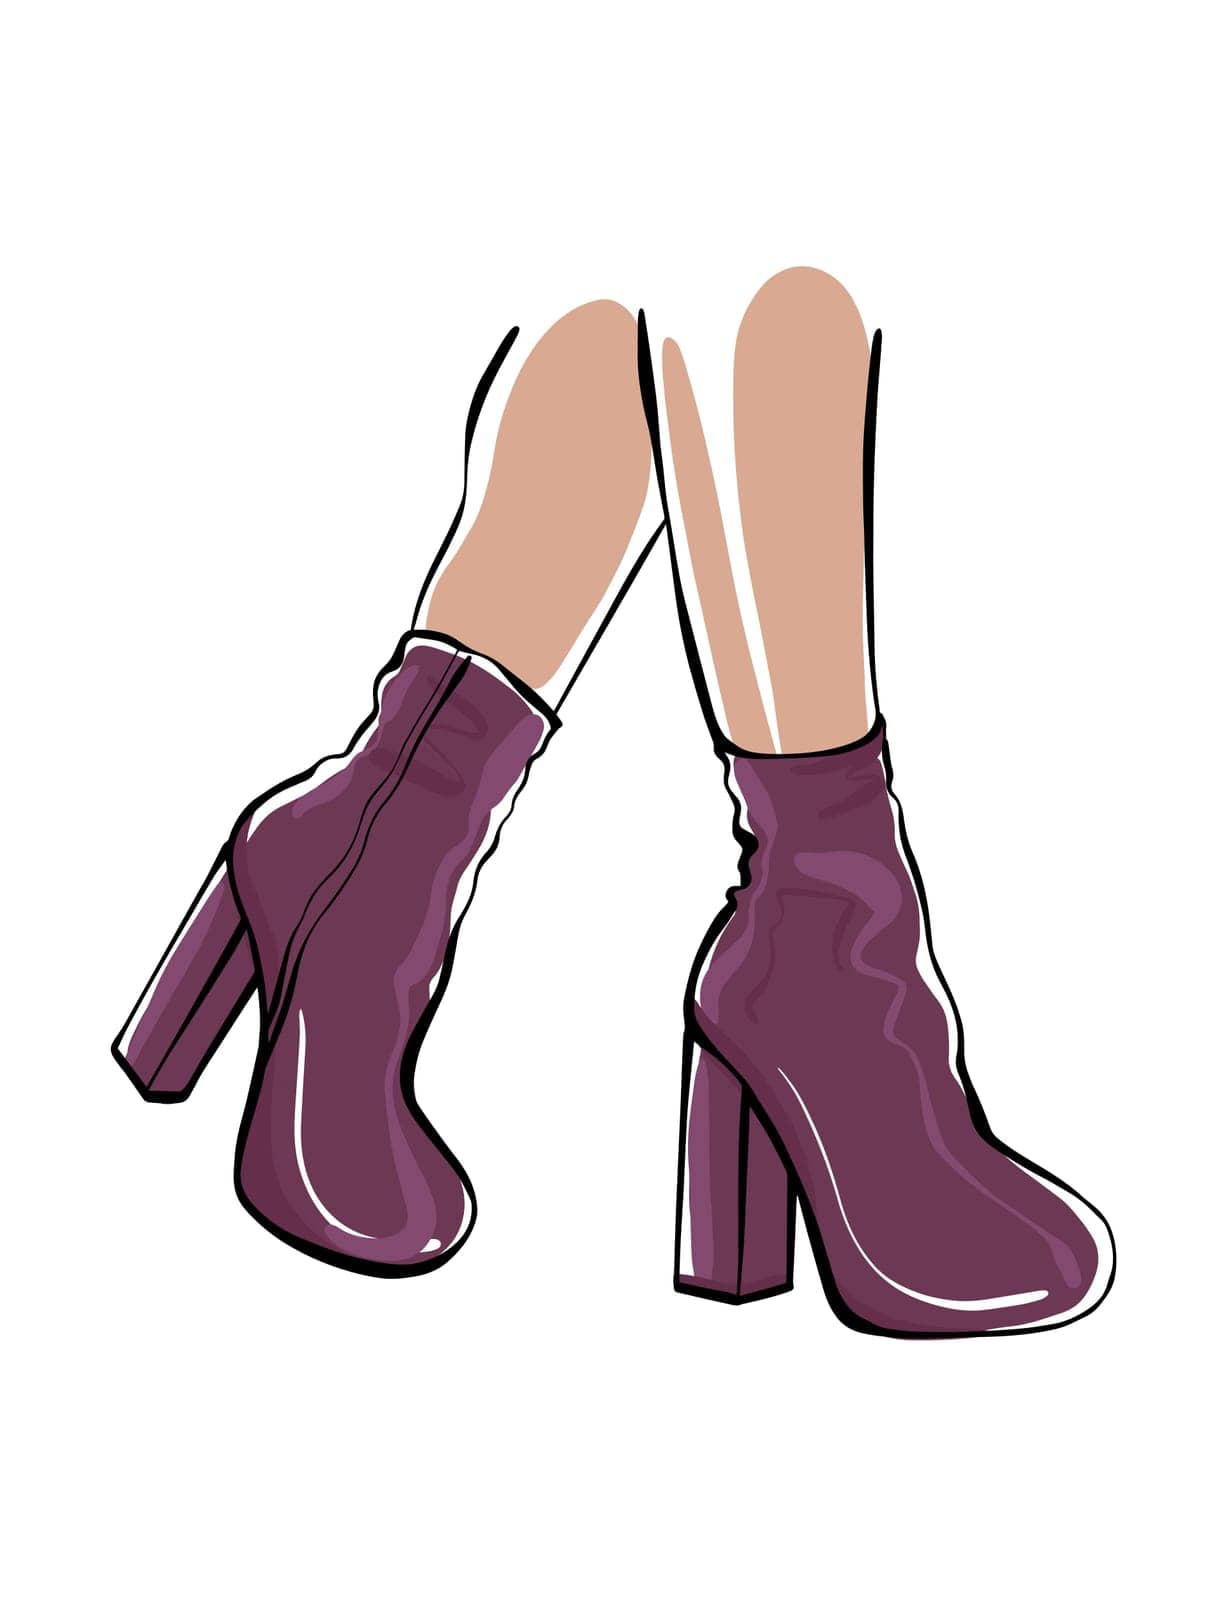 Womens feet in high-heeled boots. Fashion illustration. Womens legs. Stylish womens shoes Sketch.